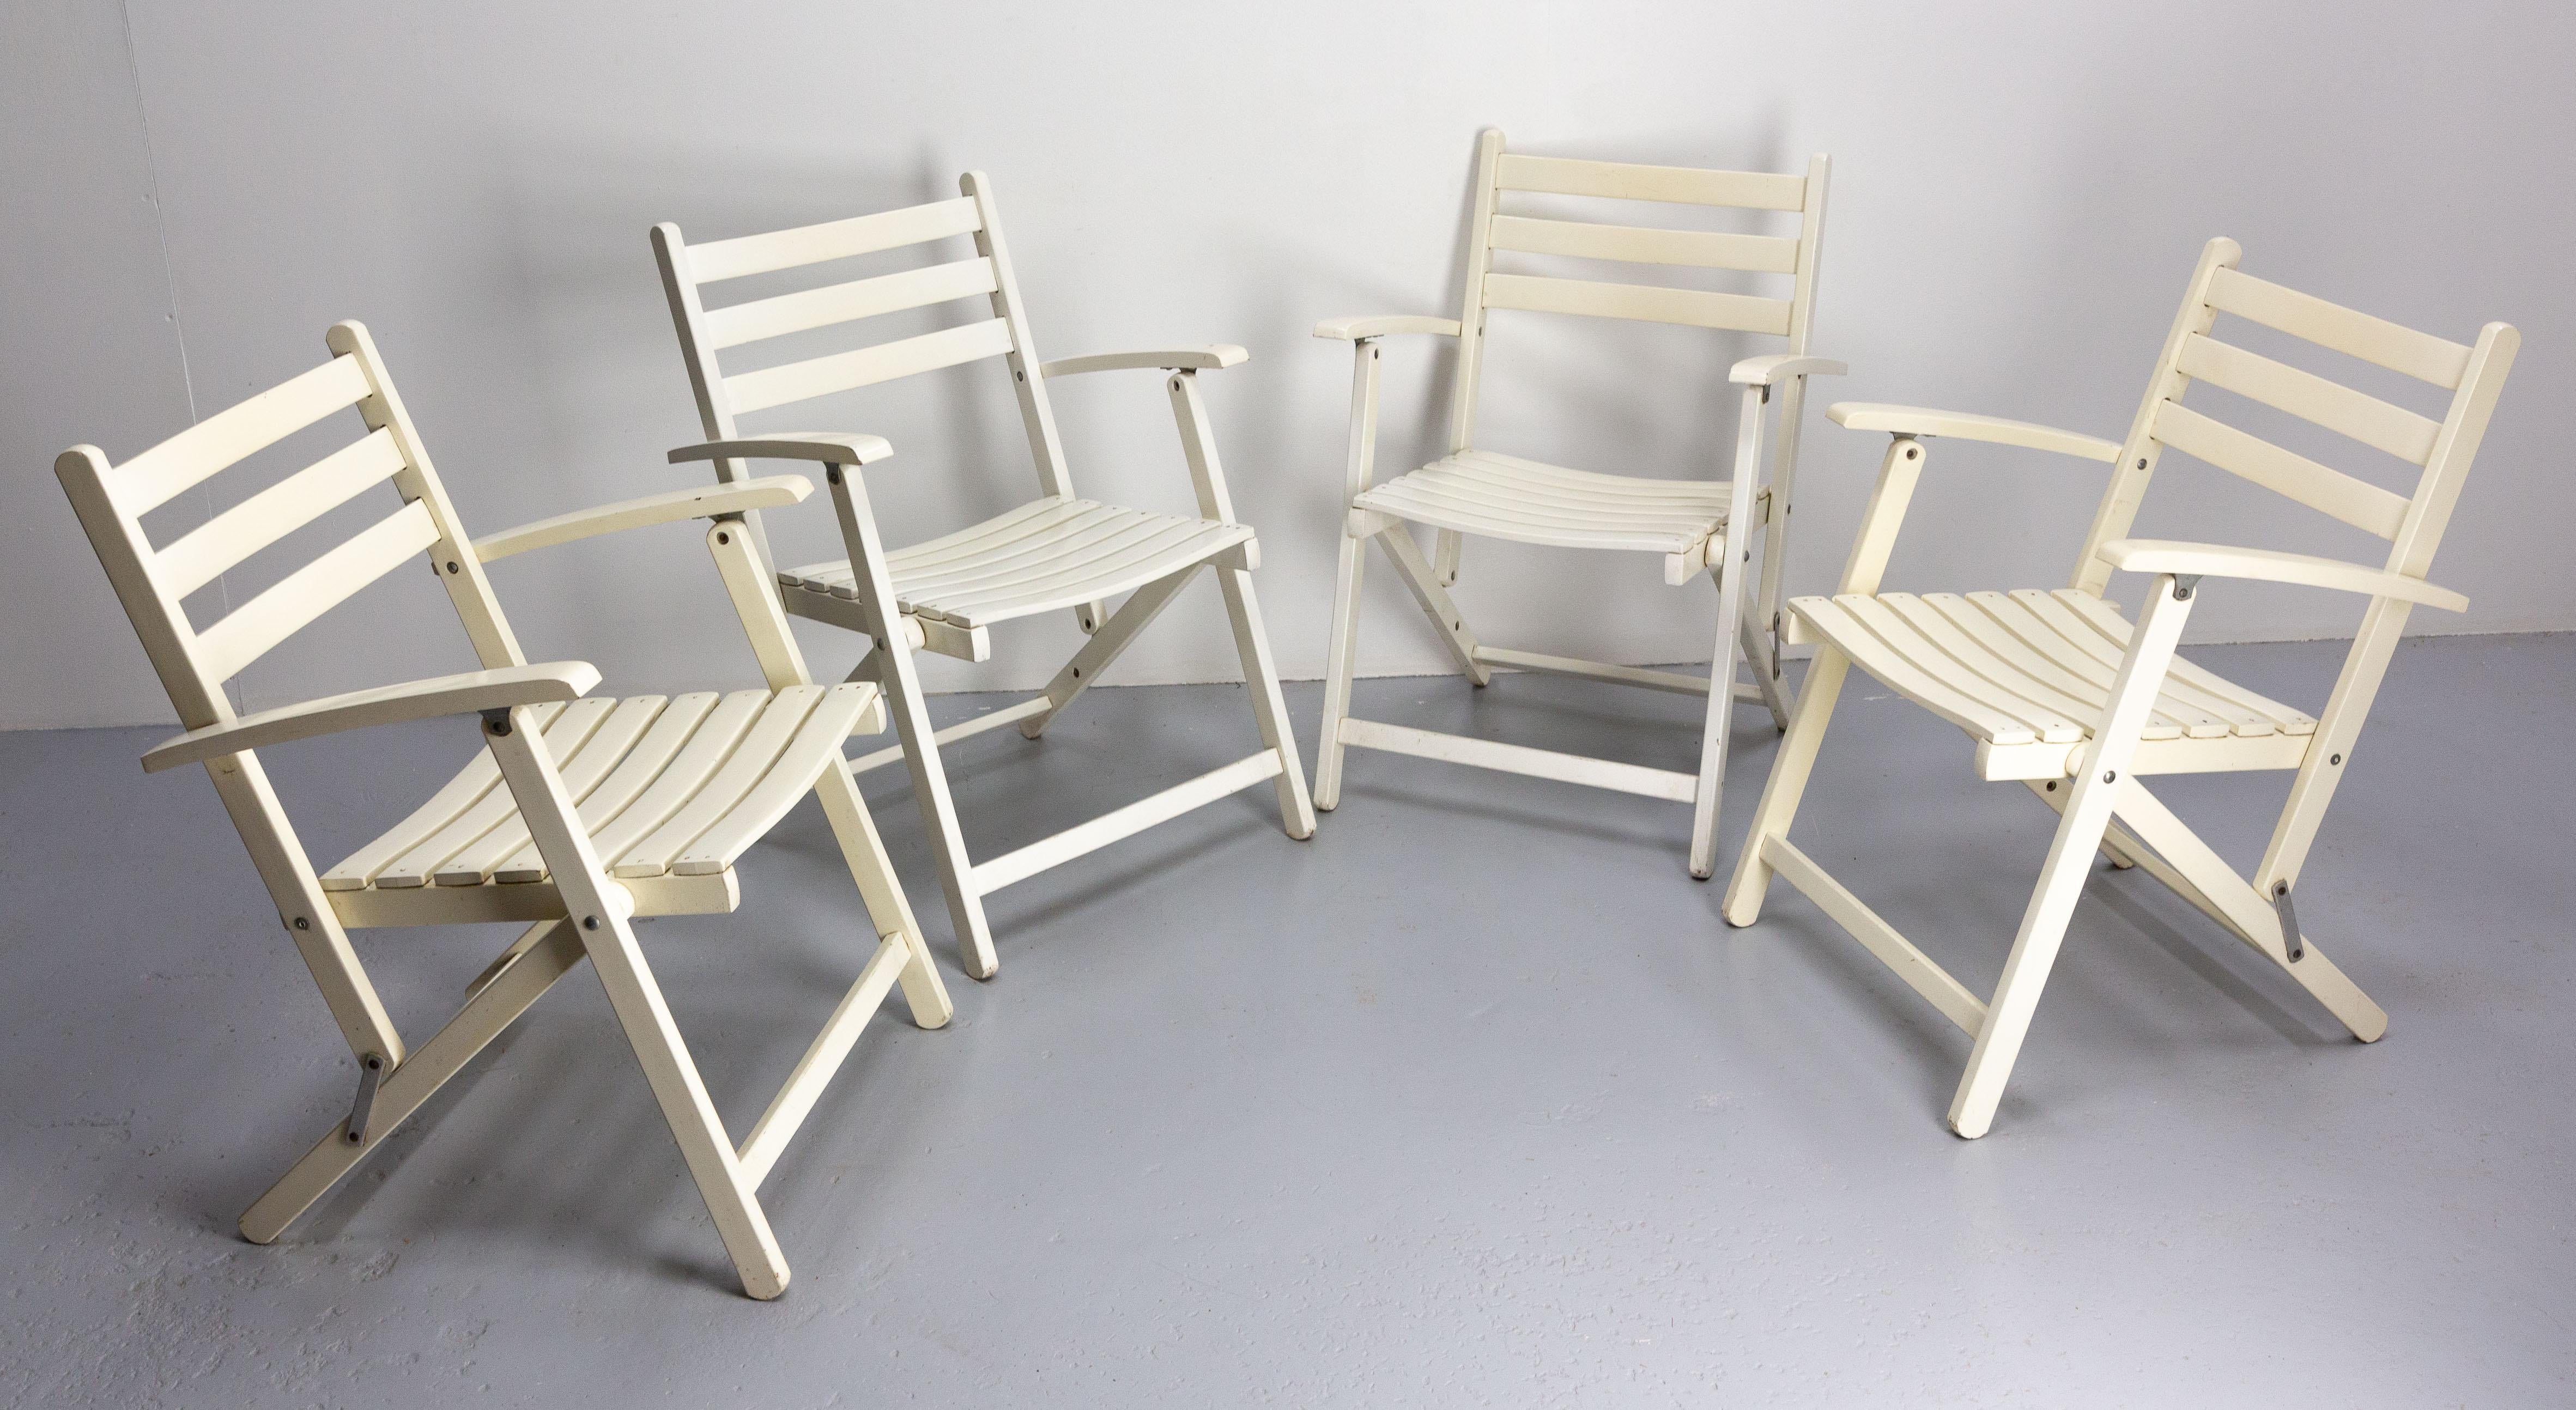 Three dining chairs for home, patio or garden by Dejou
1970s French folding chairs
Dejou enterprise is a maker of furniture for patios, gardens, home and wooden toys since 1872 in the South of France.
Good condition

Shipping:
57.5 / 83.5 /P 40 cm